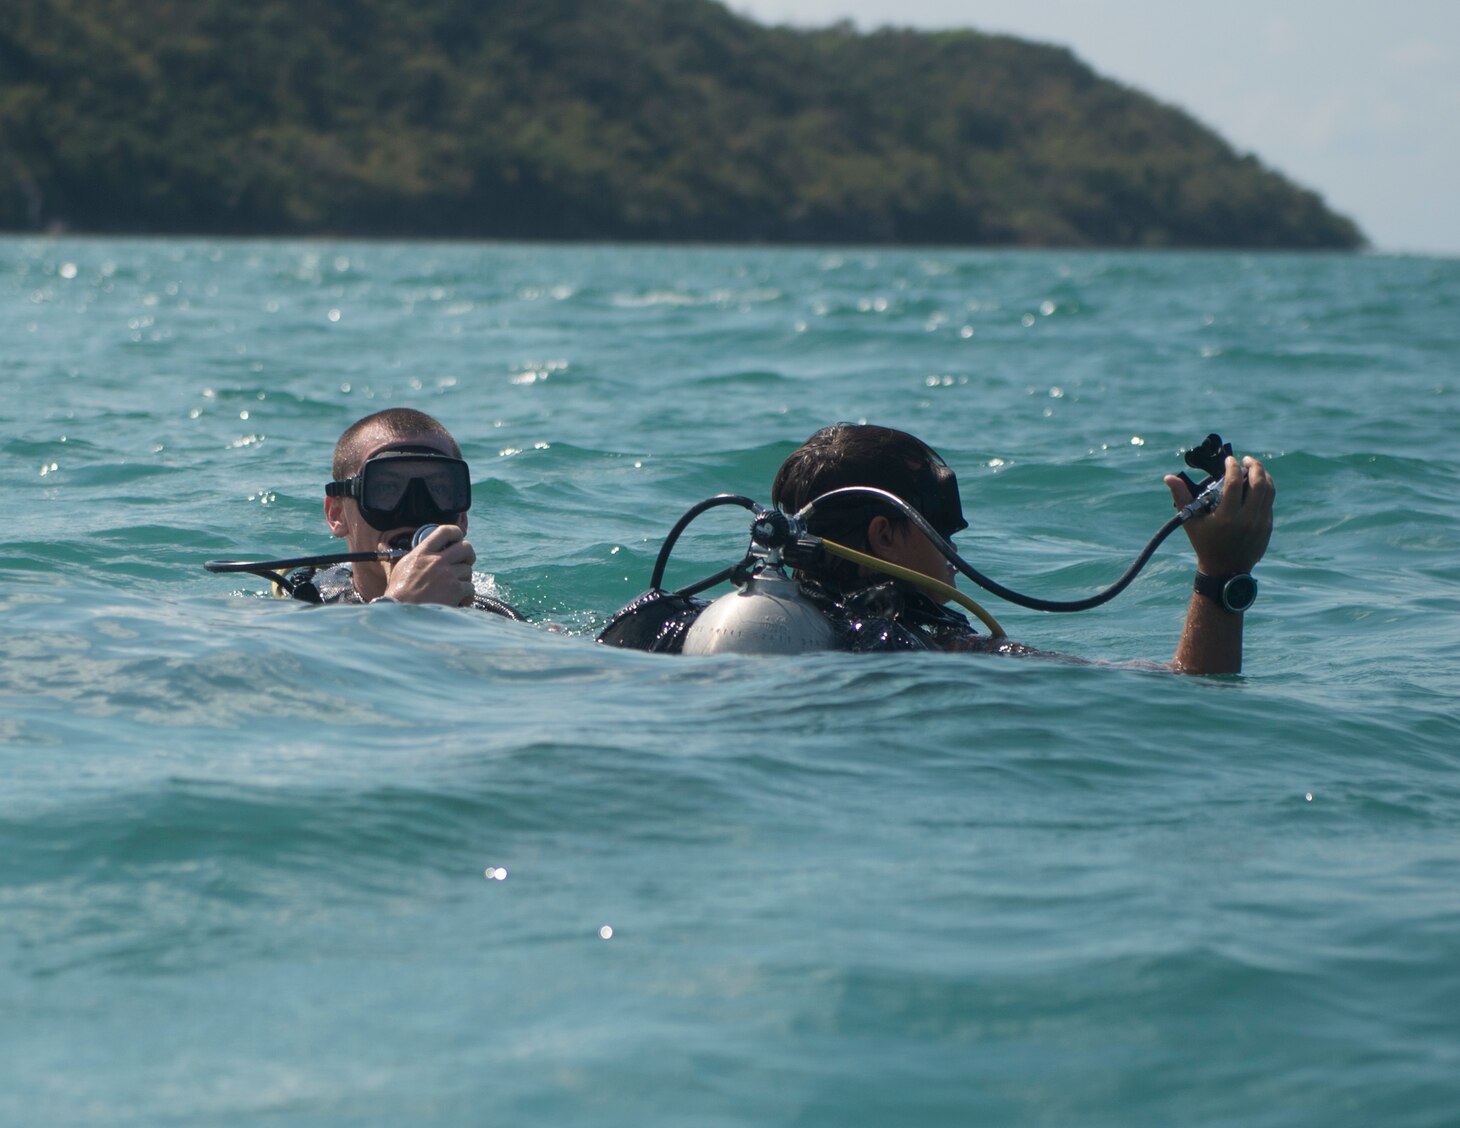 SATTAHIP, Thailand, (Feb. 19, 2019) Sailors assigned to Explosive Ordnance Disposal Mobile Unit (EODMU) 5 and Sailors with Royal Thai Navy EOD, participate in a simulated mine detection evolution during Exercise Cobra Gold 2019 in Thailand.